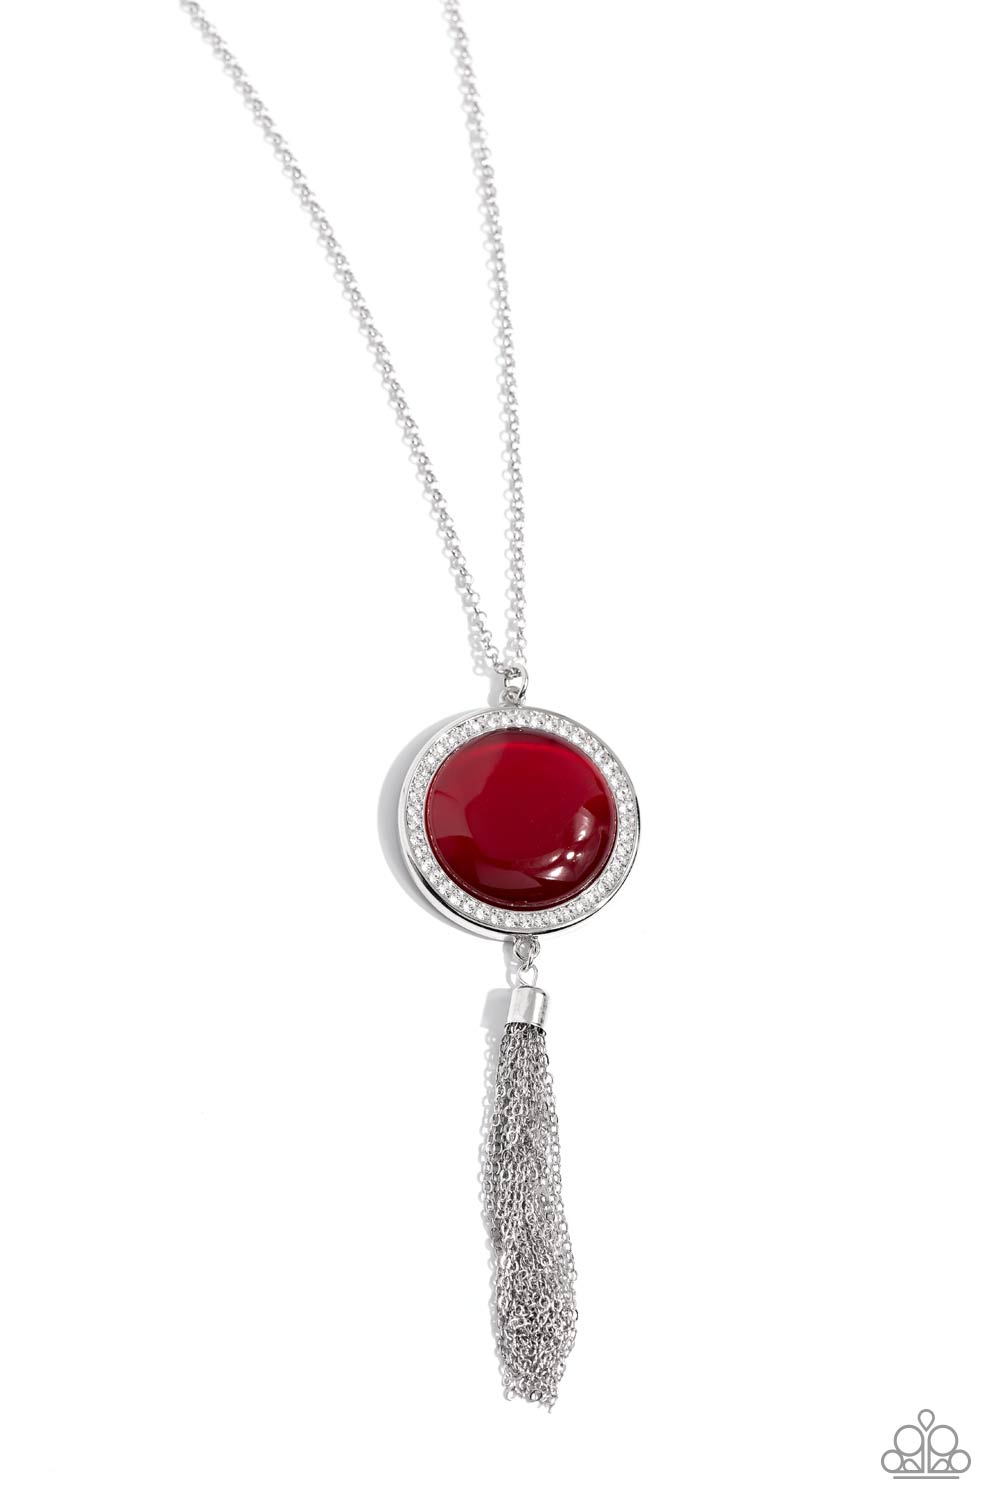 Tallahassee Tassel - red - Paparazzi necklace